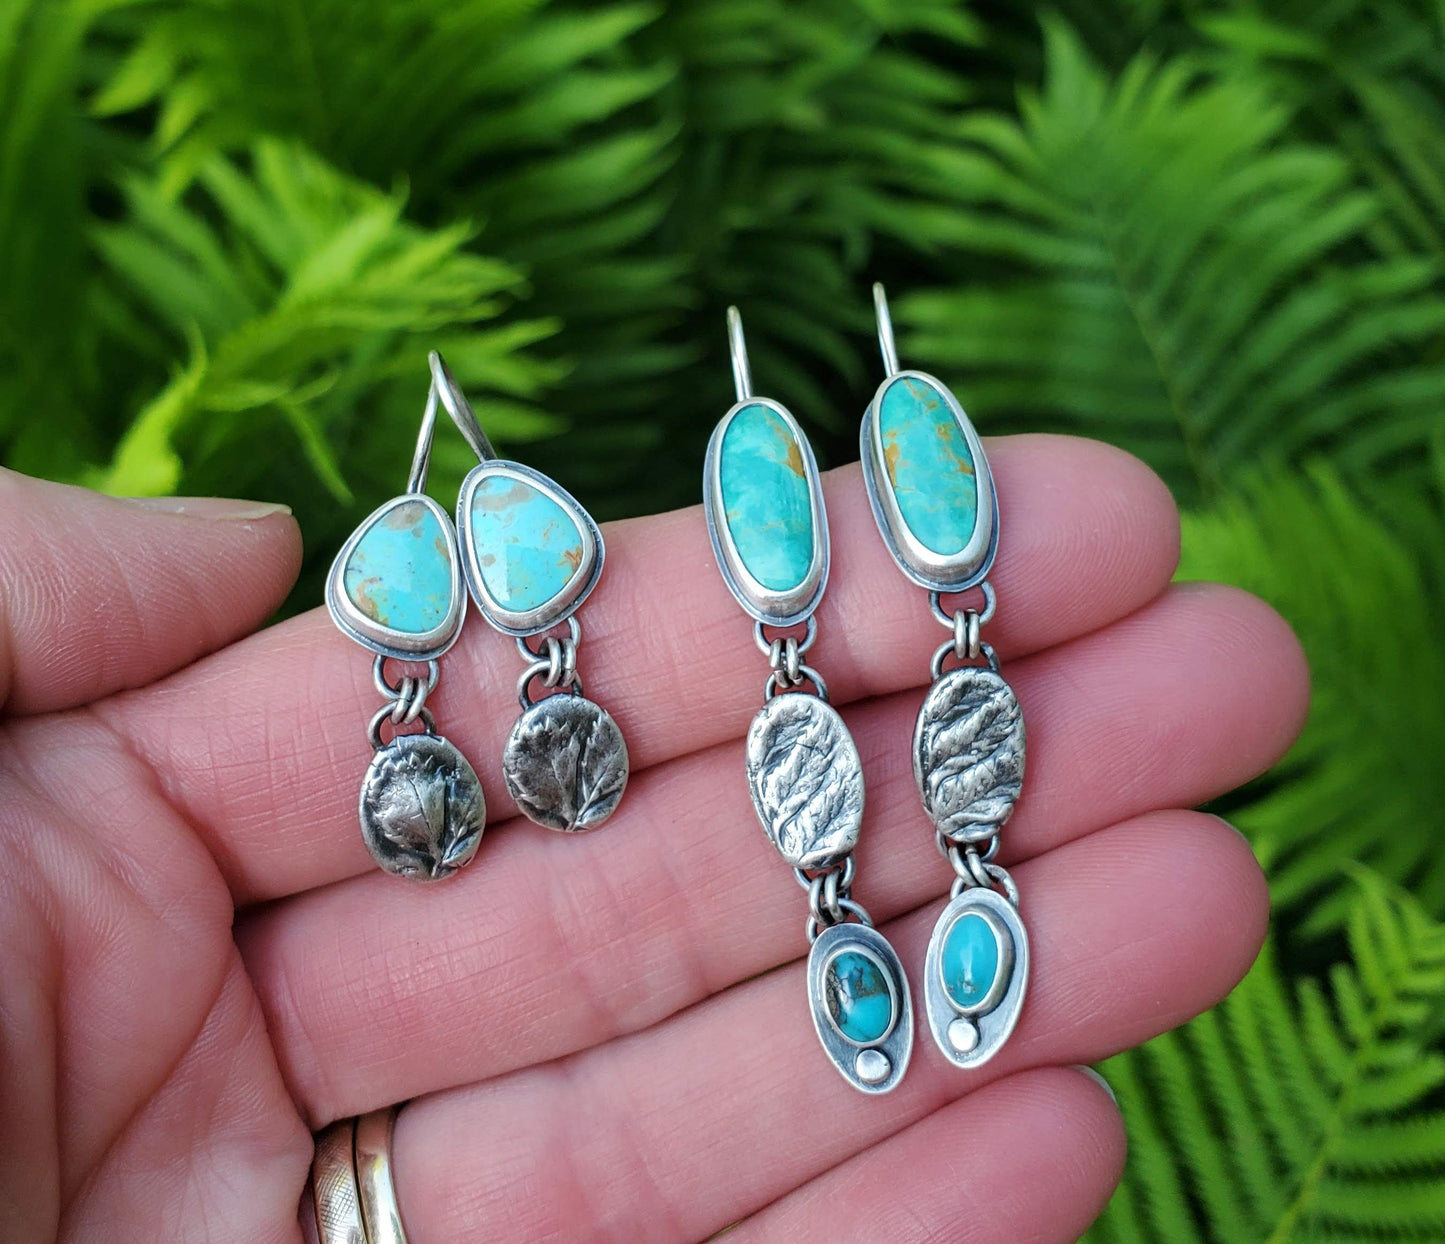 Long and Lean Turquoise and Fern Earrings